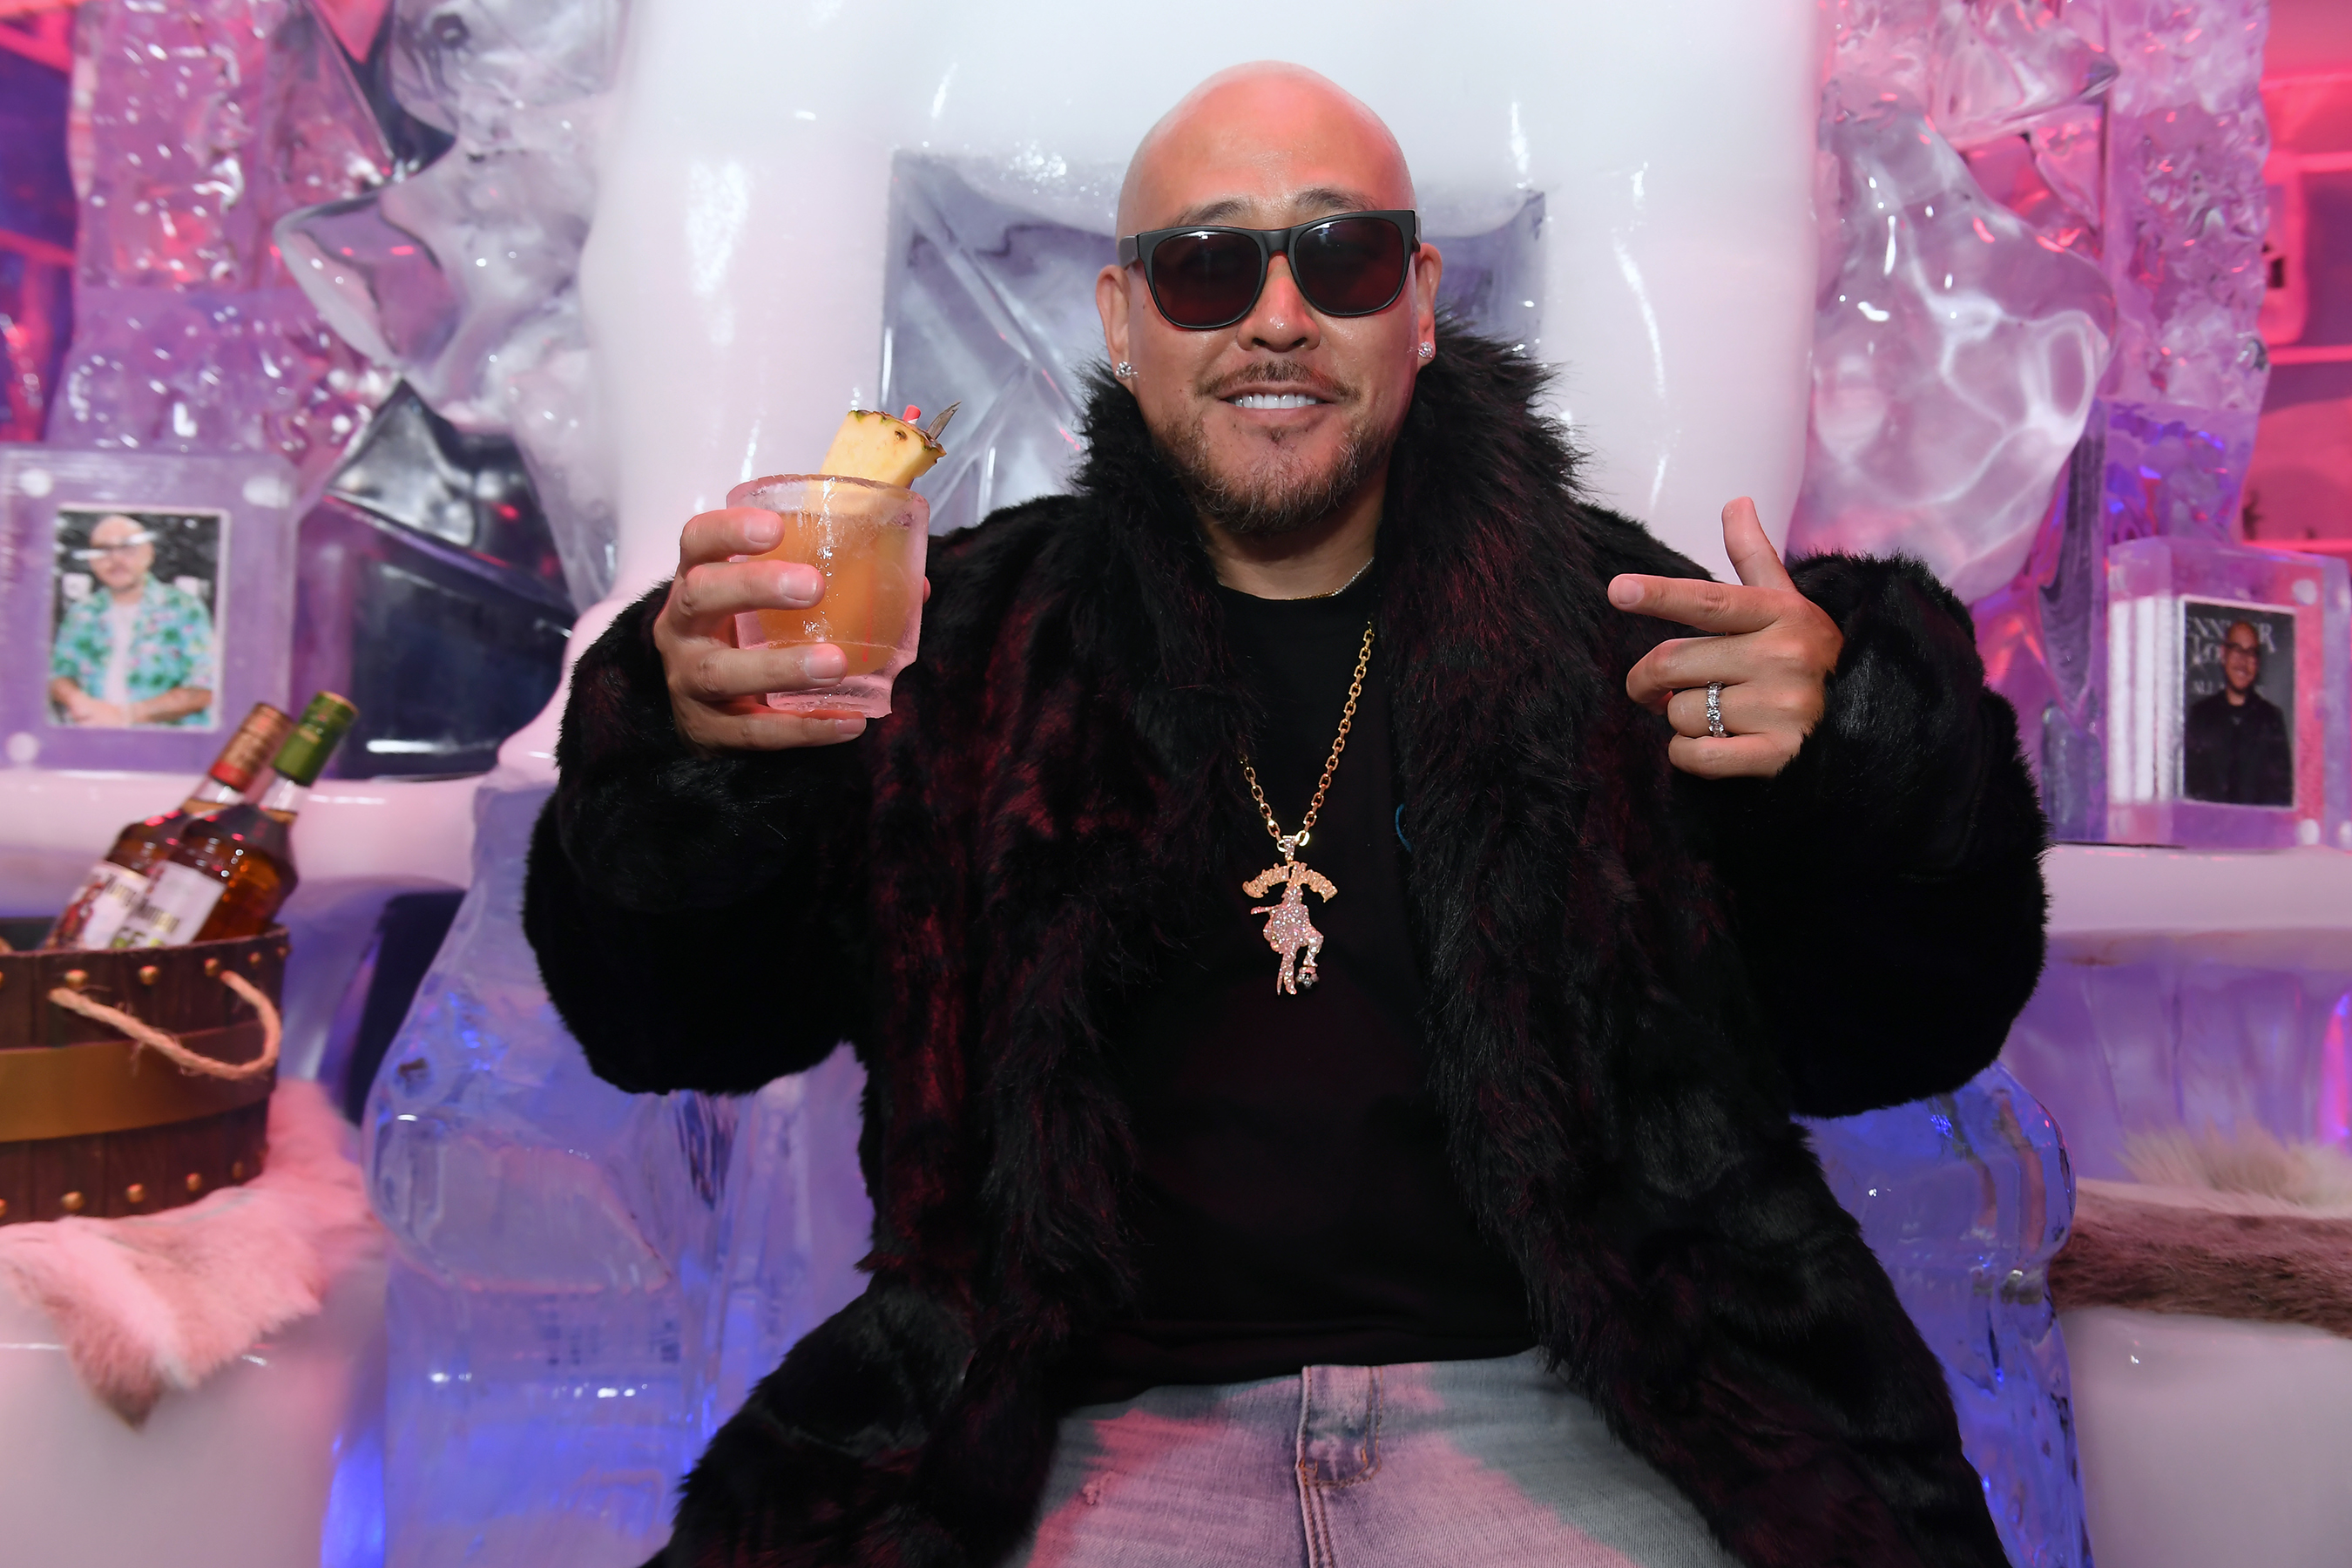 Captain Morgan celebrates partnership launch with iconic jeweler and entrepreneur, Ben Baller in Las Vegas, Nevada on Wednesday, August 11, 2021.